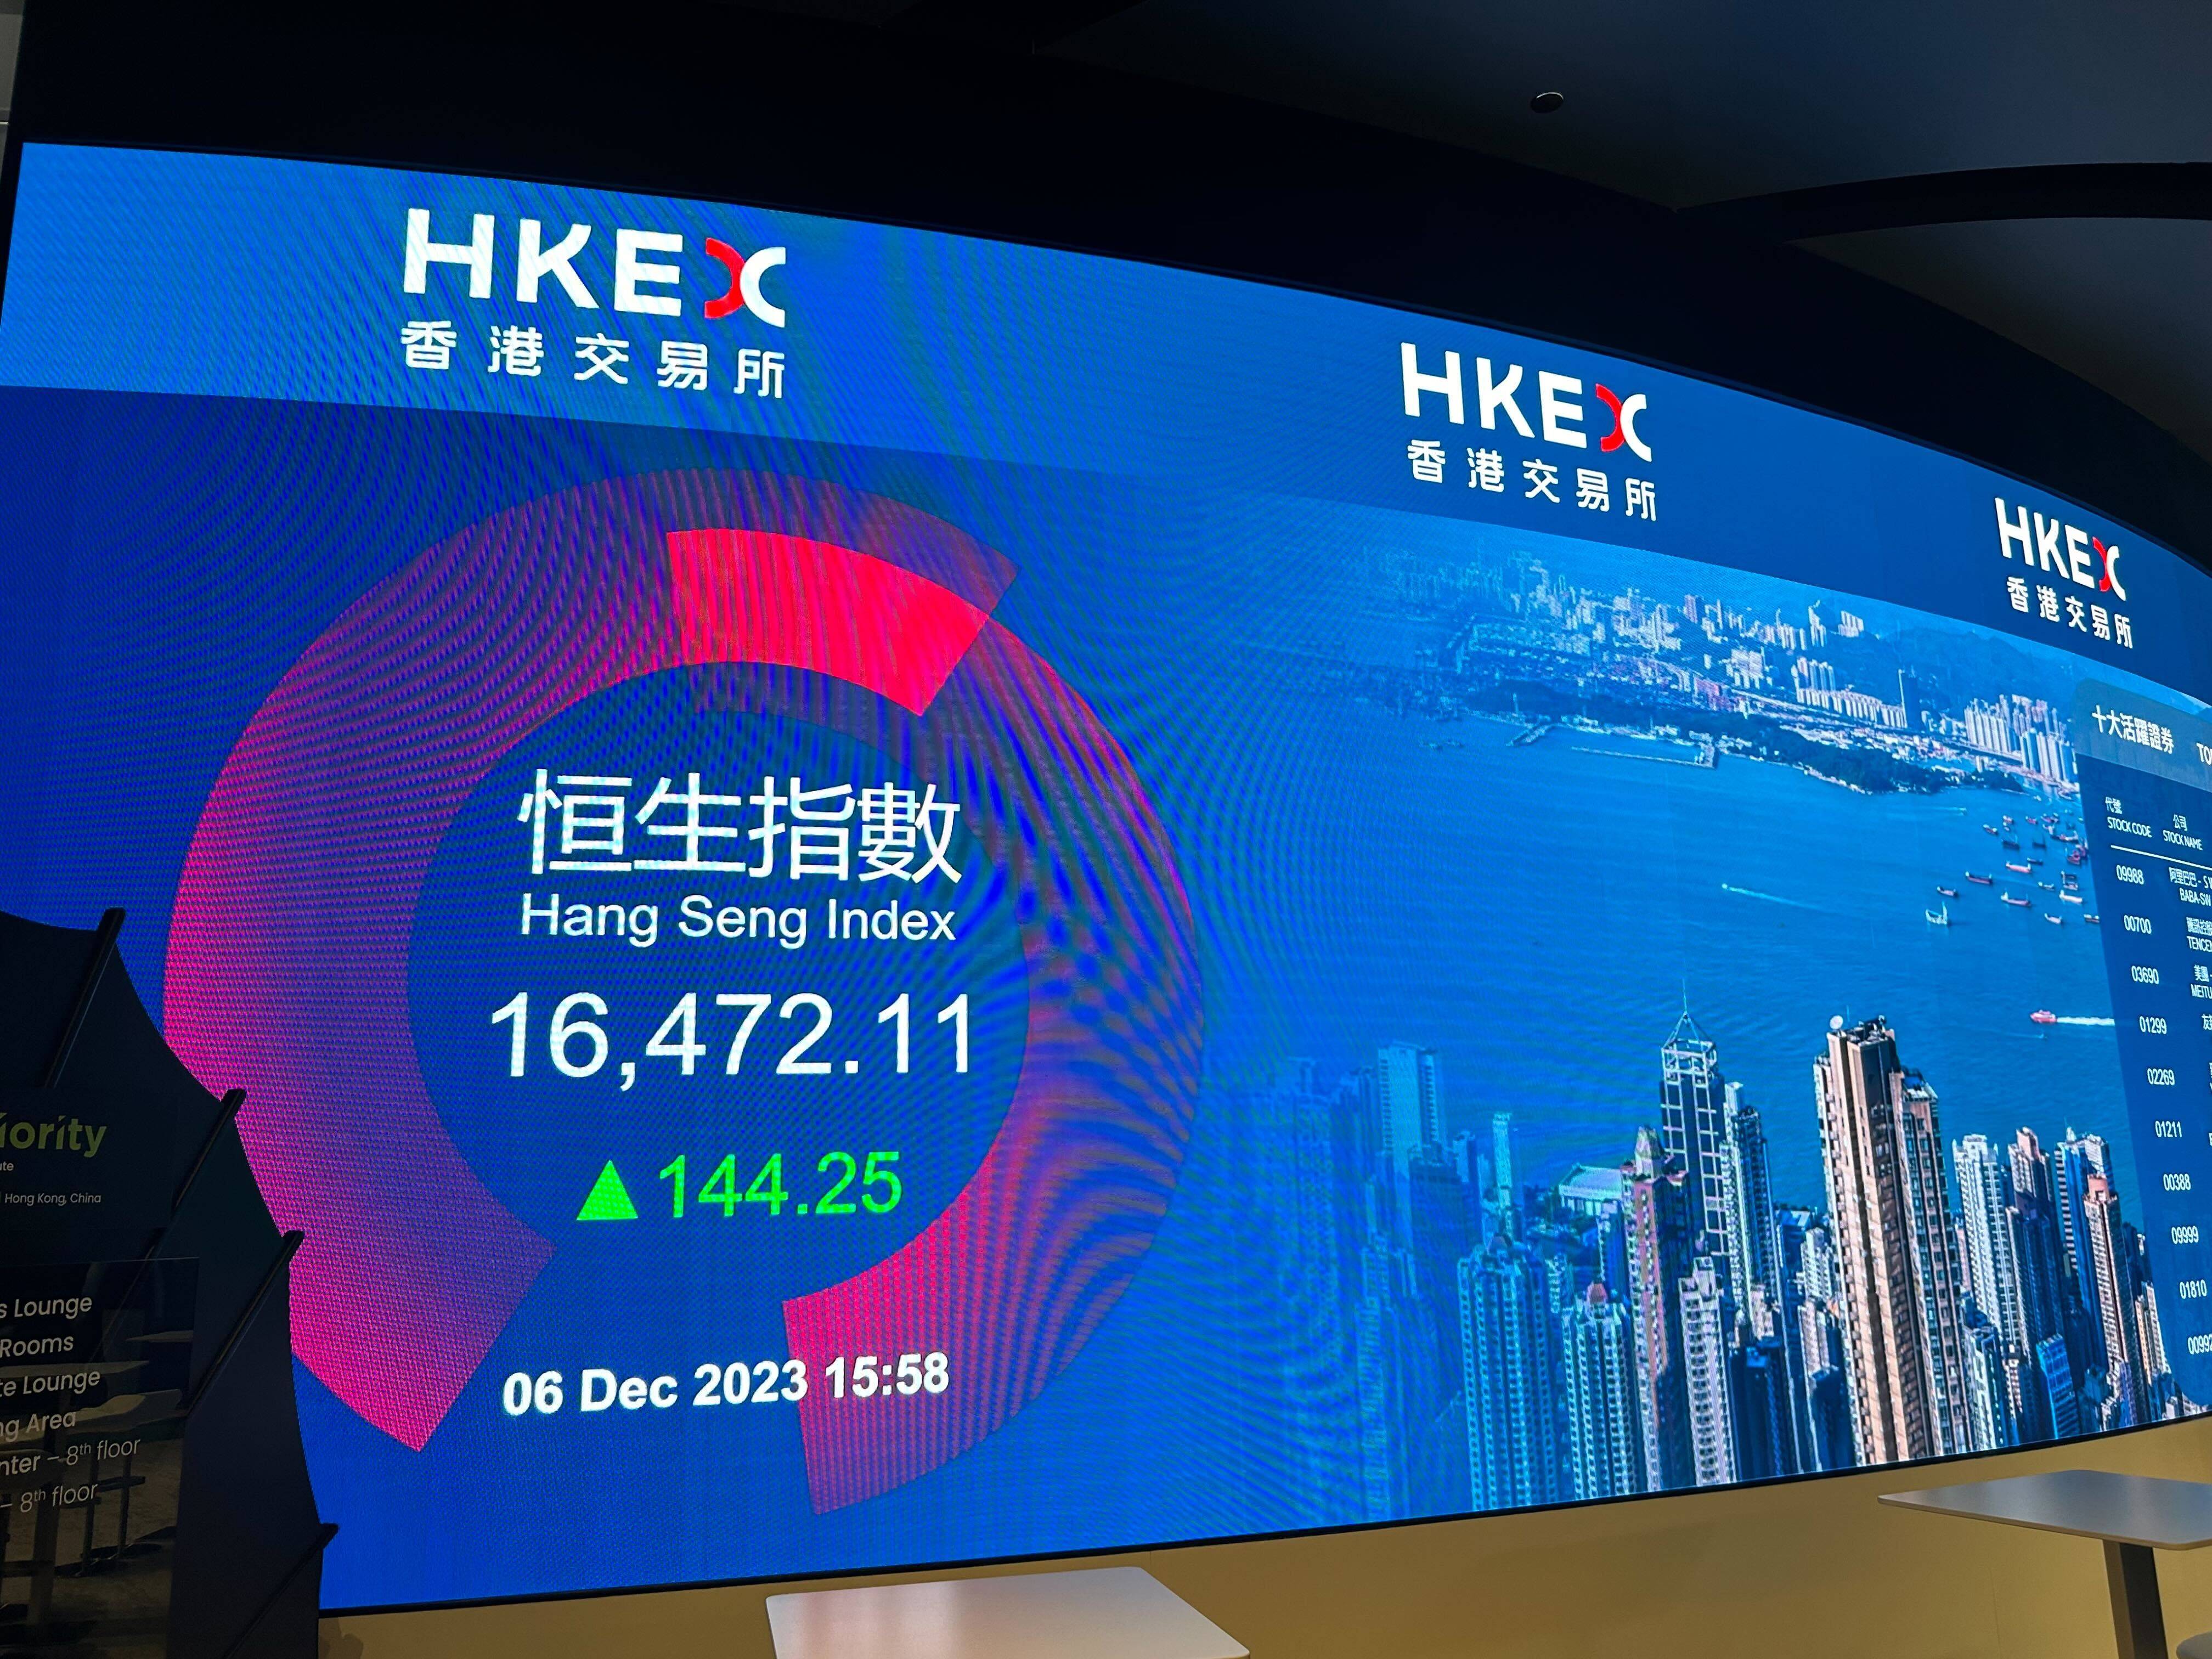 China’s market watchdog has initiated moves to boost the fortunes of the Hong Kong stock exchange. Photo: Mia Castagnone